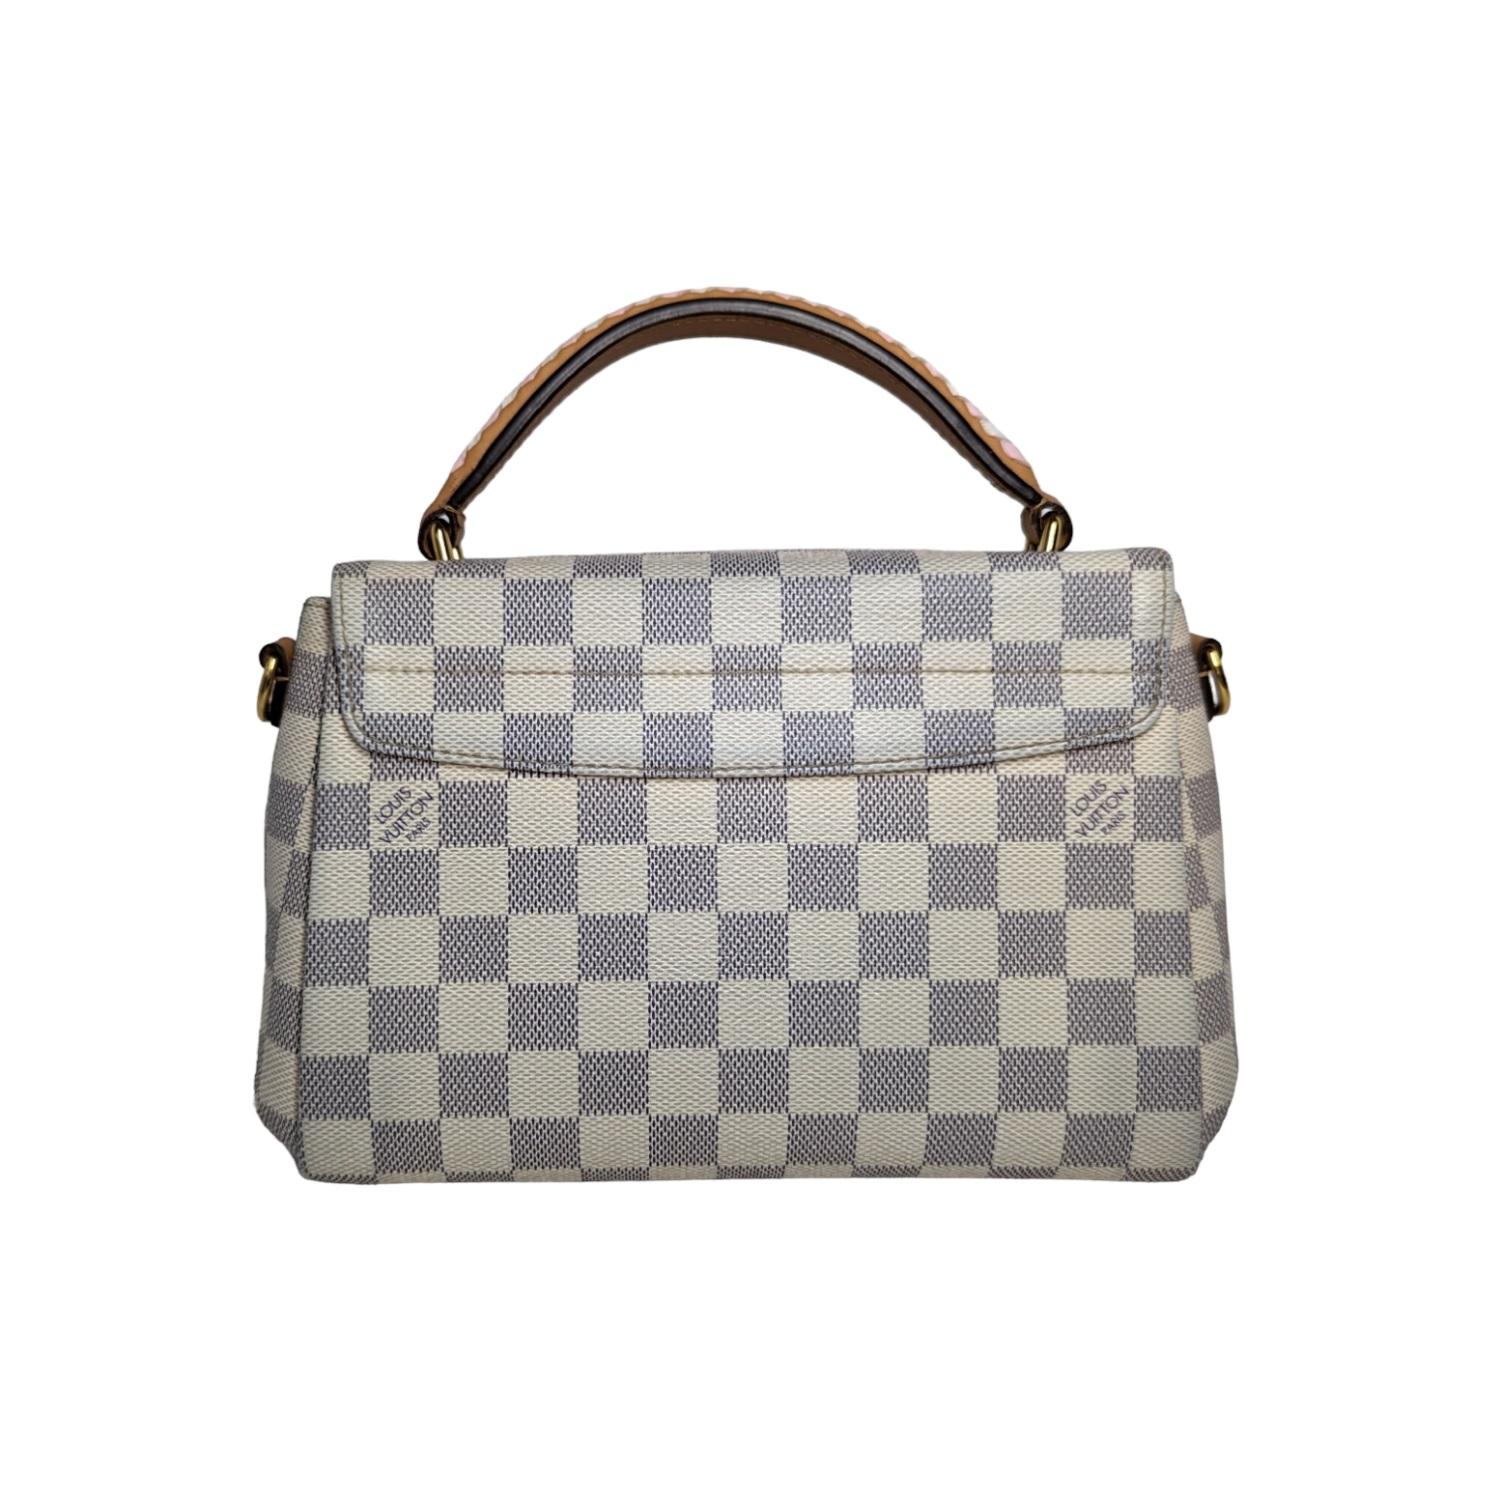 Louis Vuitton Damier Azur Braided Croisette in Rose. This compact tote is crafted of Louis Vuitton Damier coated canvas in blue and white with white and pink leather accents on the handle and shoulder strap. The bag features signature vachetta